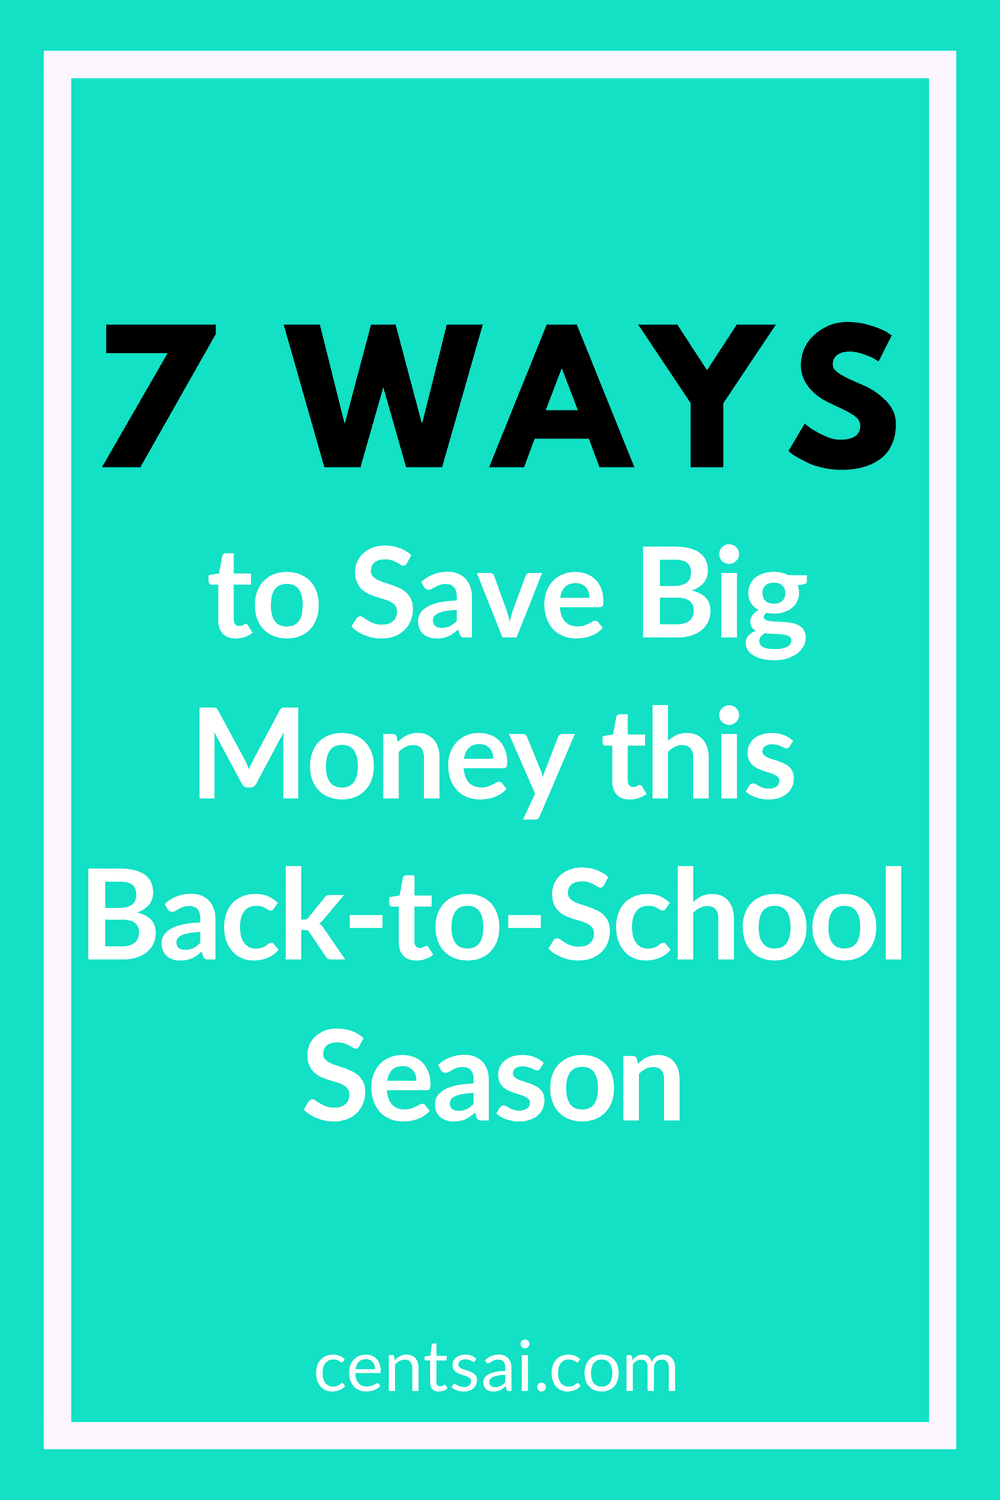 7 Ways to Save Big Money this Back-to-School Season. Back-to-school time can be stressful, and money is always tight. We’ve got some great ways for you to save big this year. #backtoschool #savemoneytips #savemoneyideas #savingmoneyideas